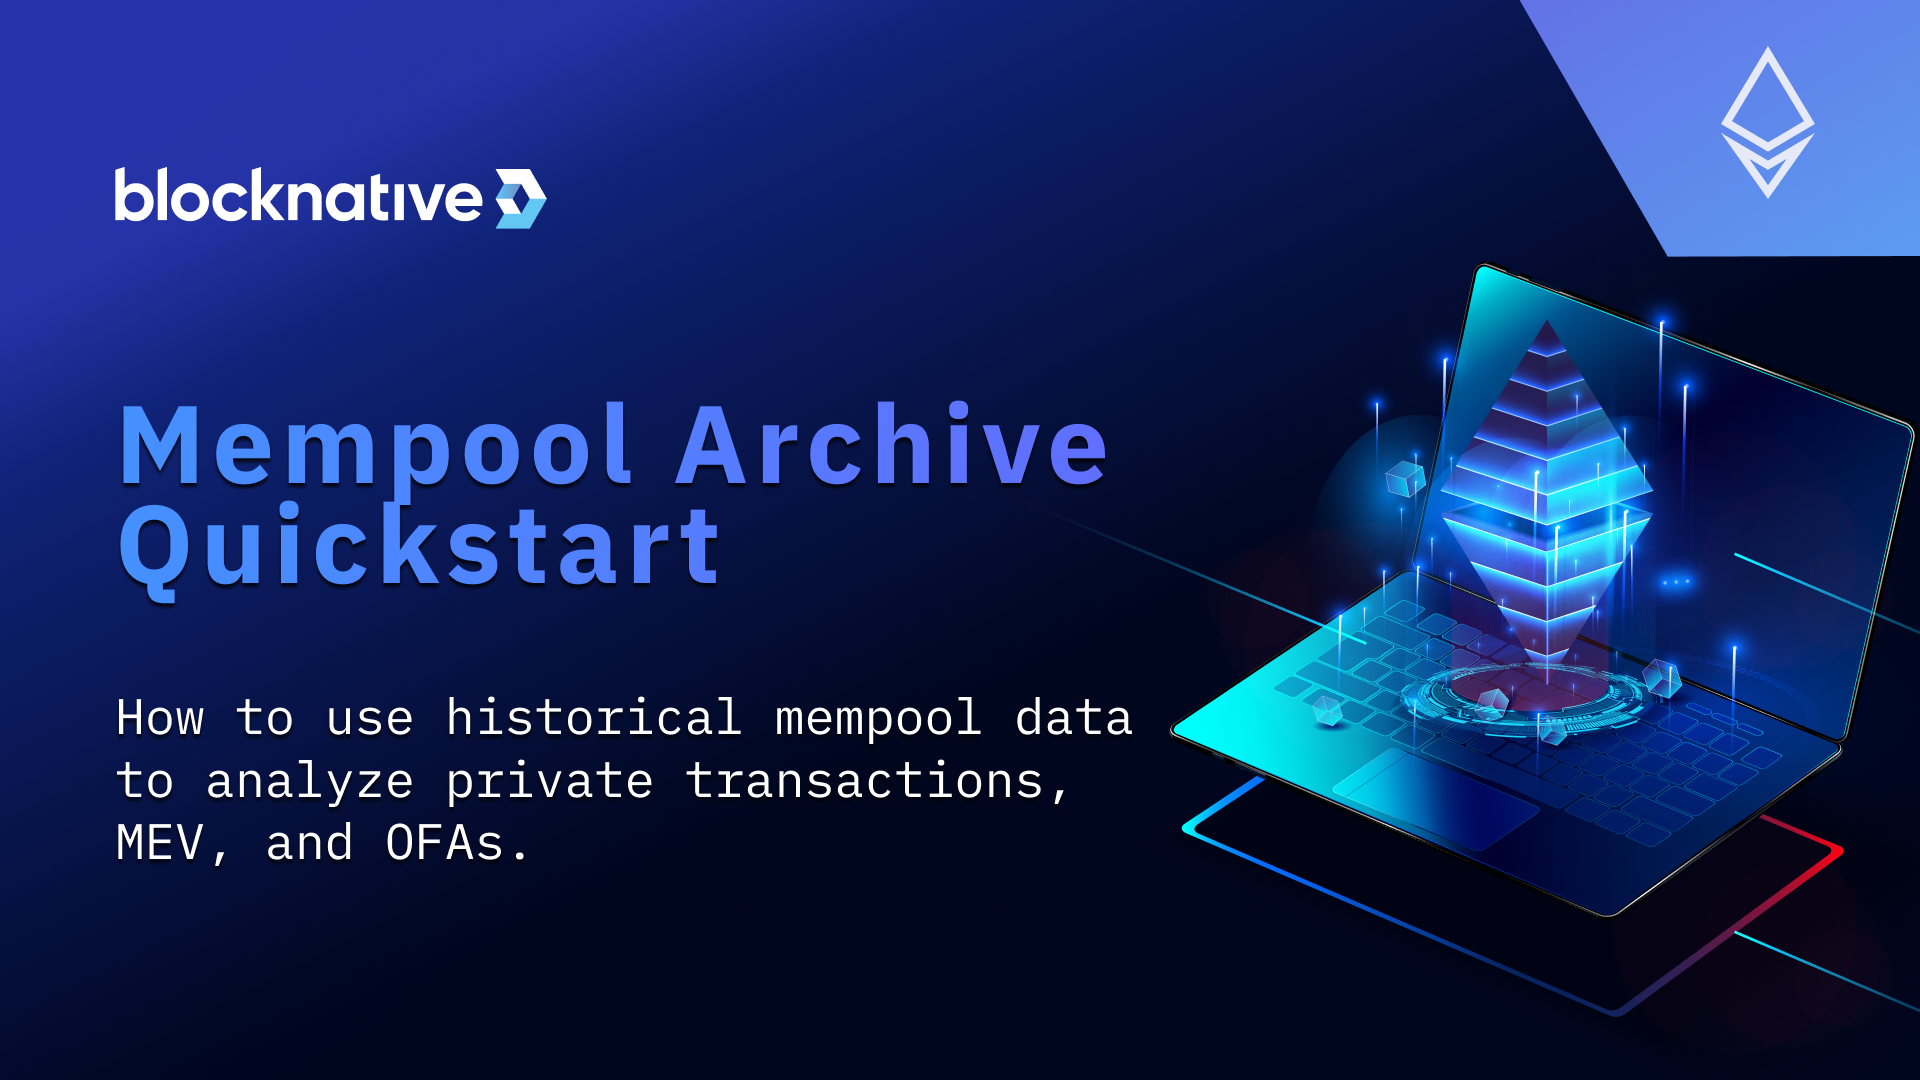 Mempool Archive Quickstart: How to use Blocknative's historical Ethereum mempool data to analyze private transactions, MEV, and OFAs